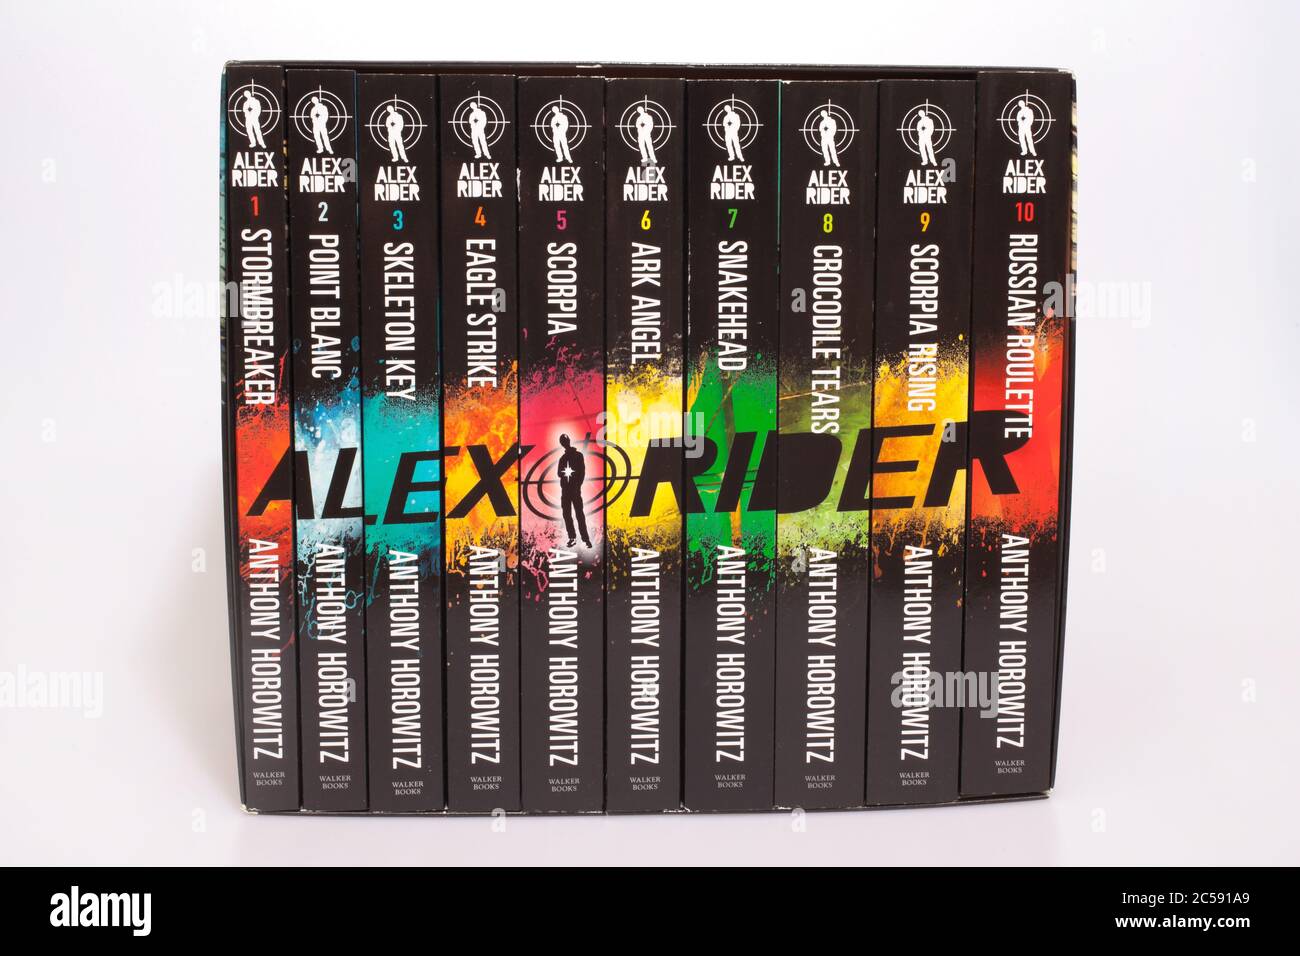 The Alex Rider Book Collection A British Spy Thriller By Anthony Horowitz Stock Photo Alamy